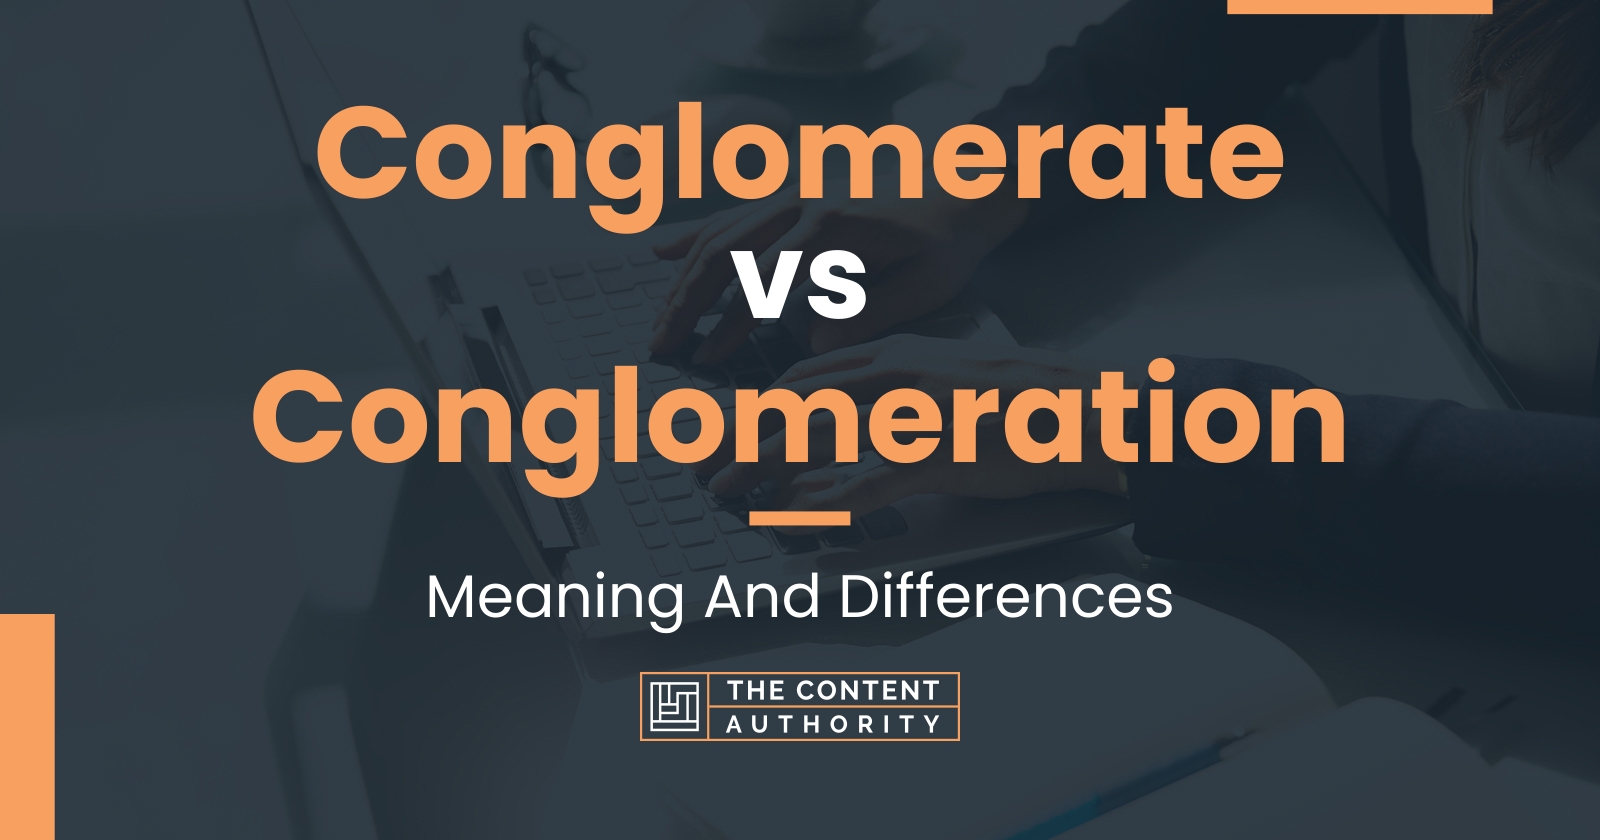 Conglomerate vs Conglomeration: Meaning And Differences